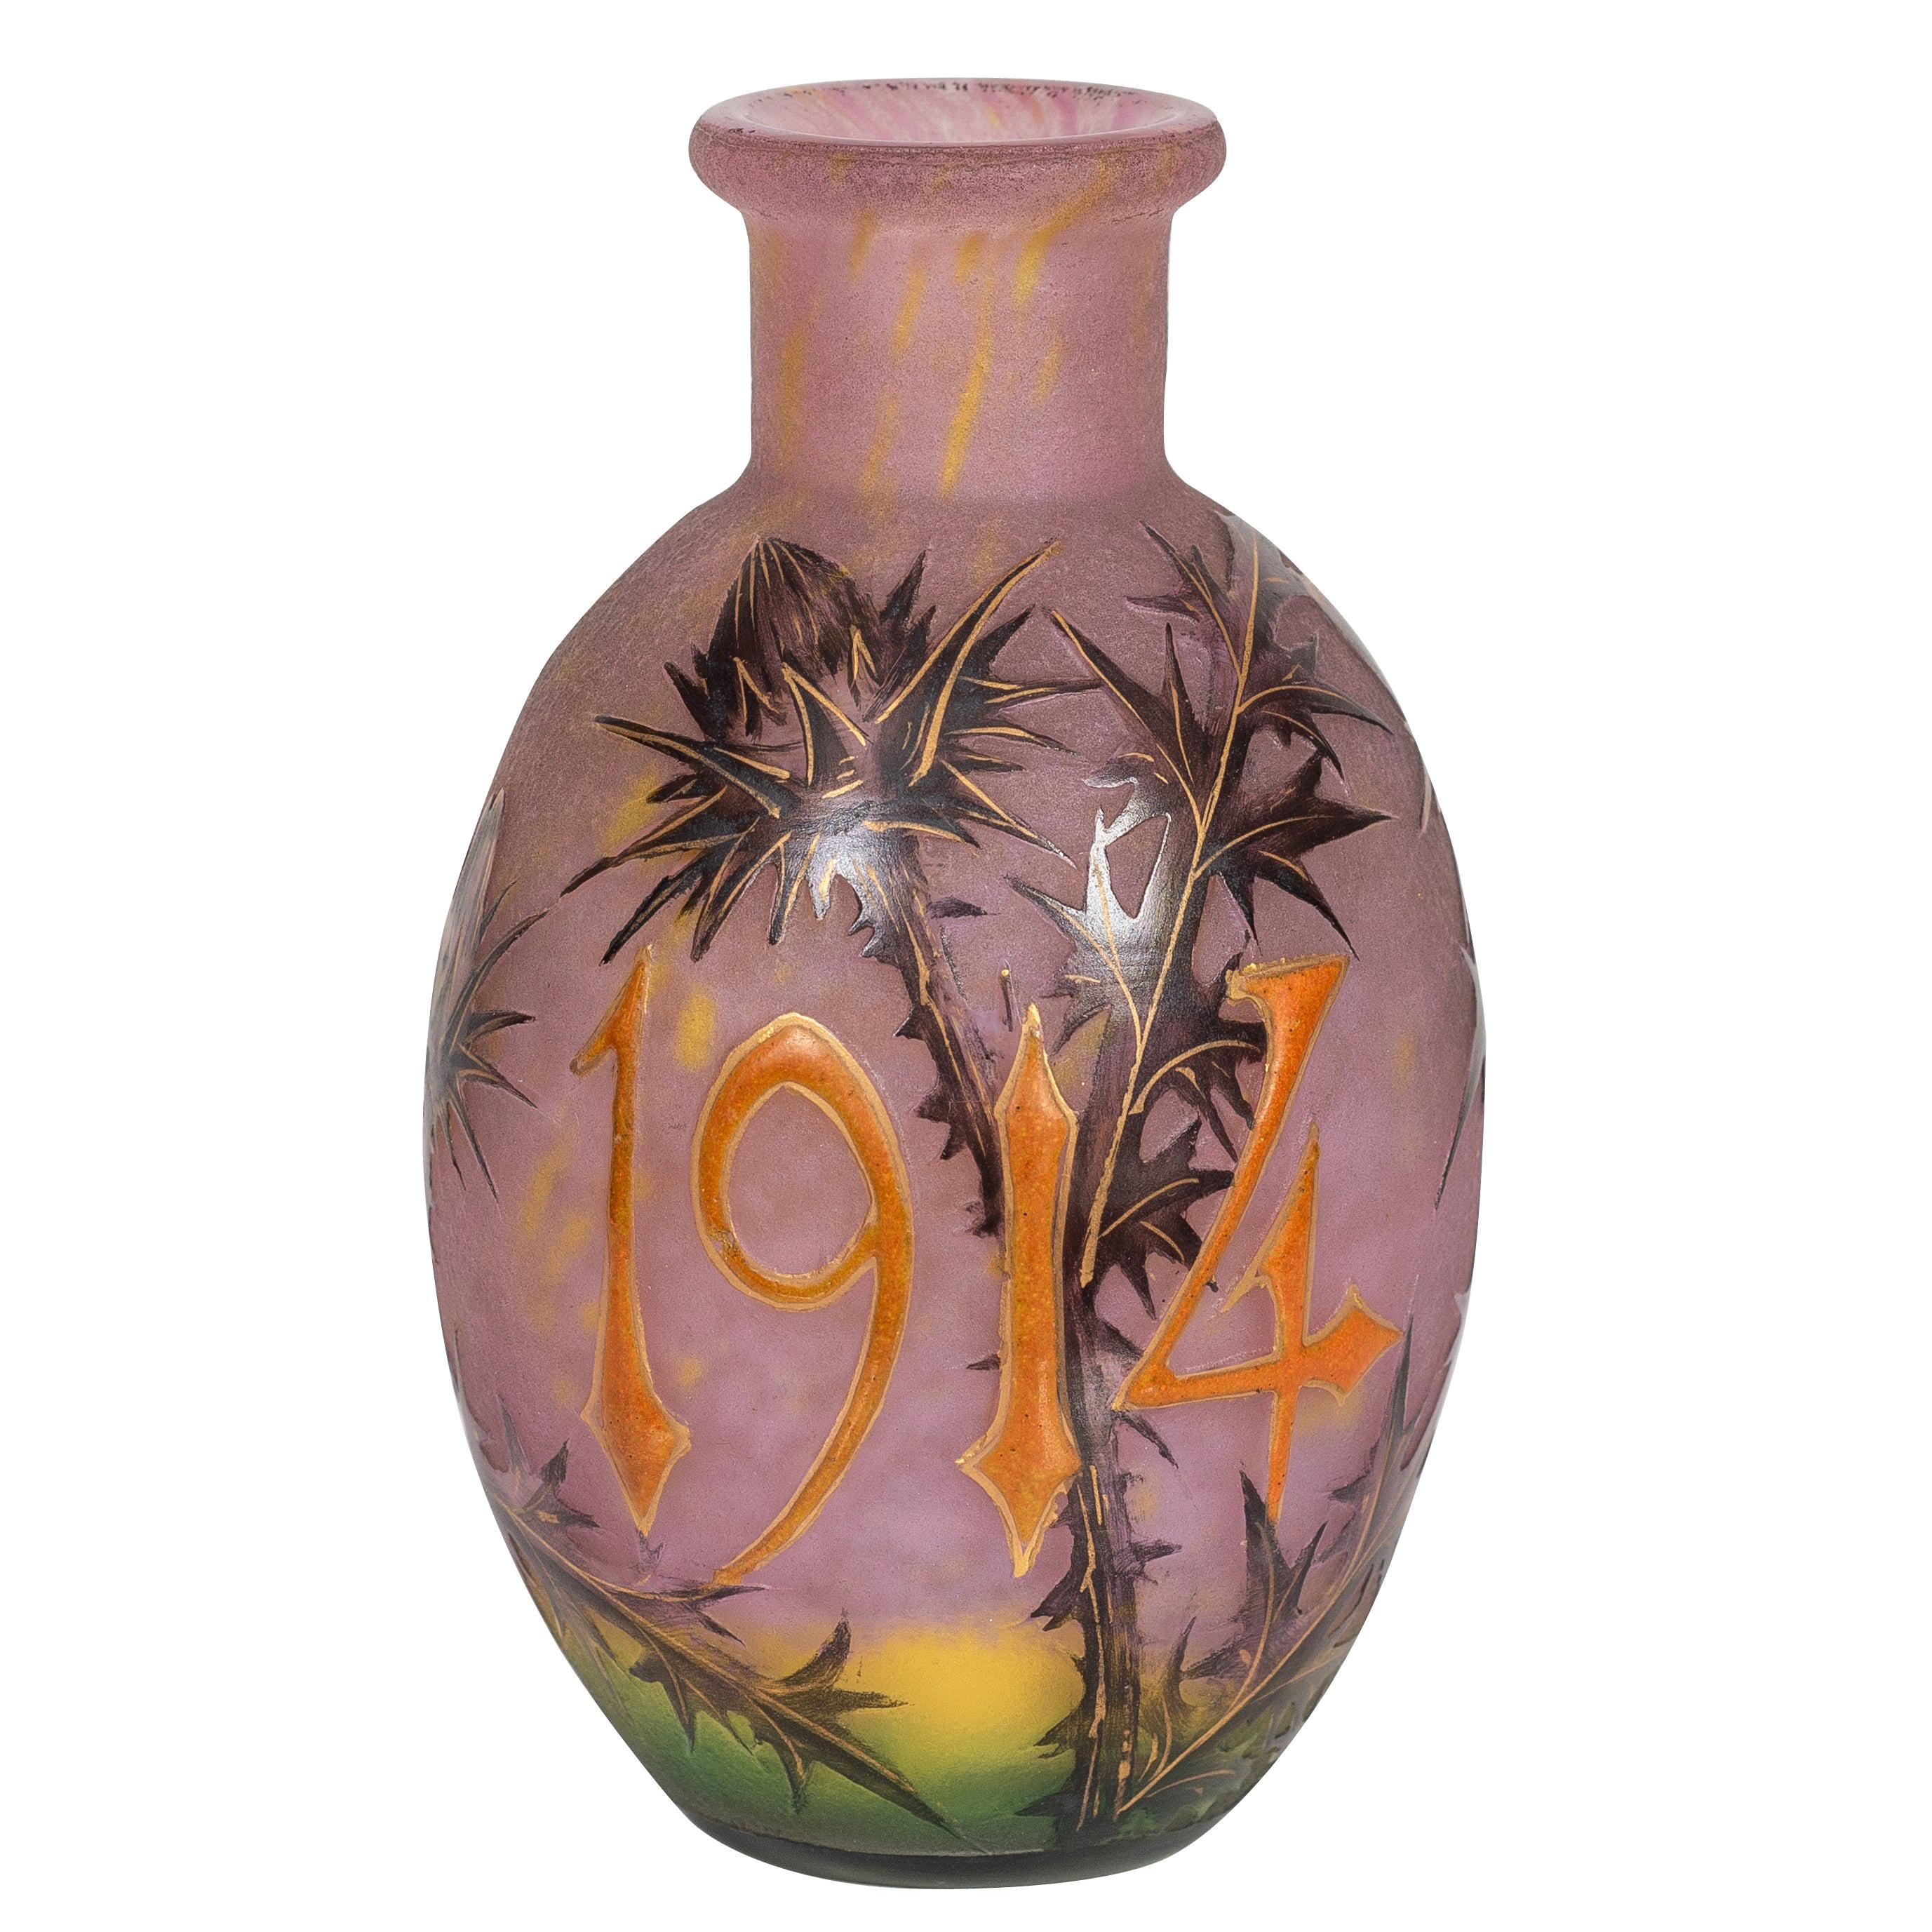 Daum Nancy Enameled and Internally Decorated Glass Vase, "1914" For Sale